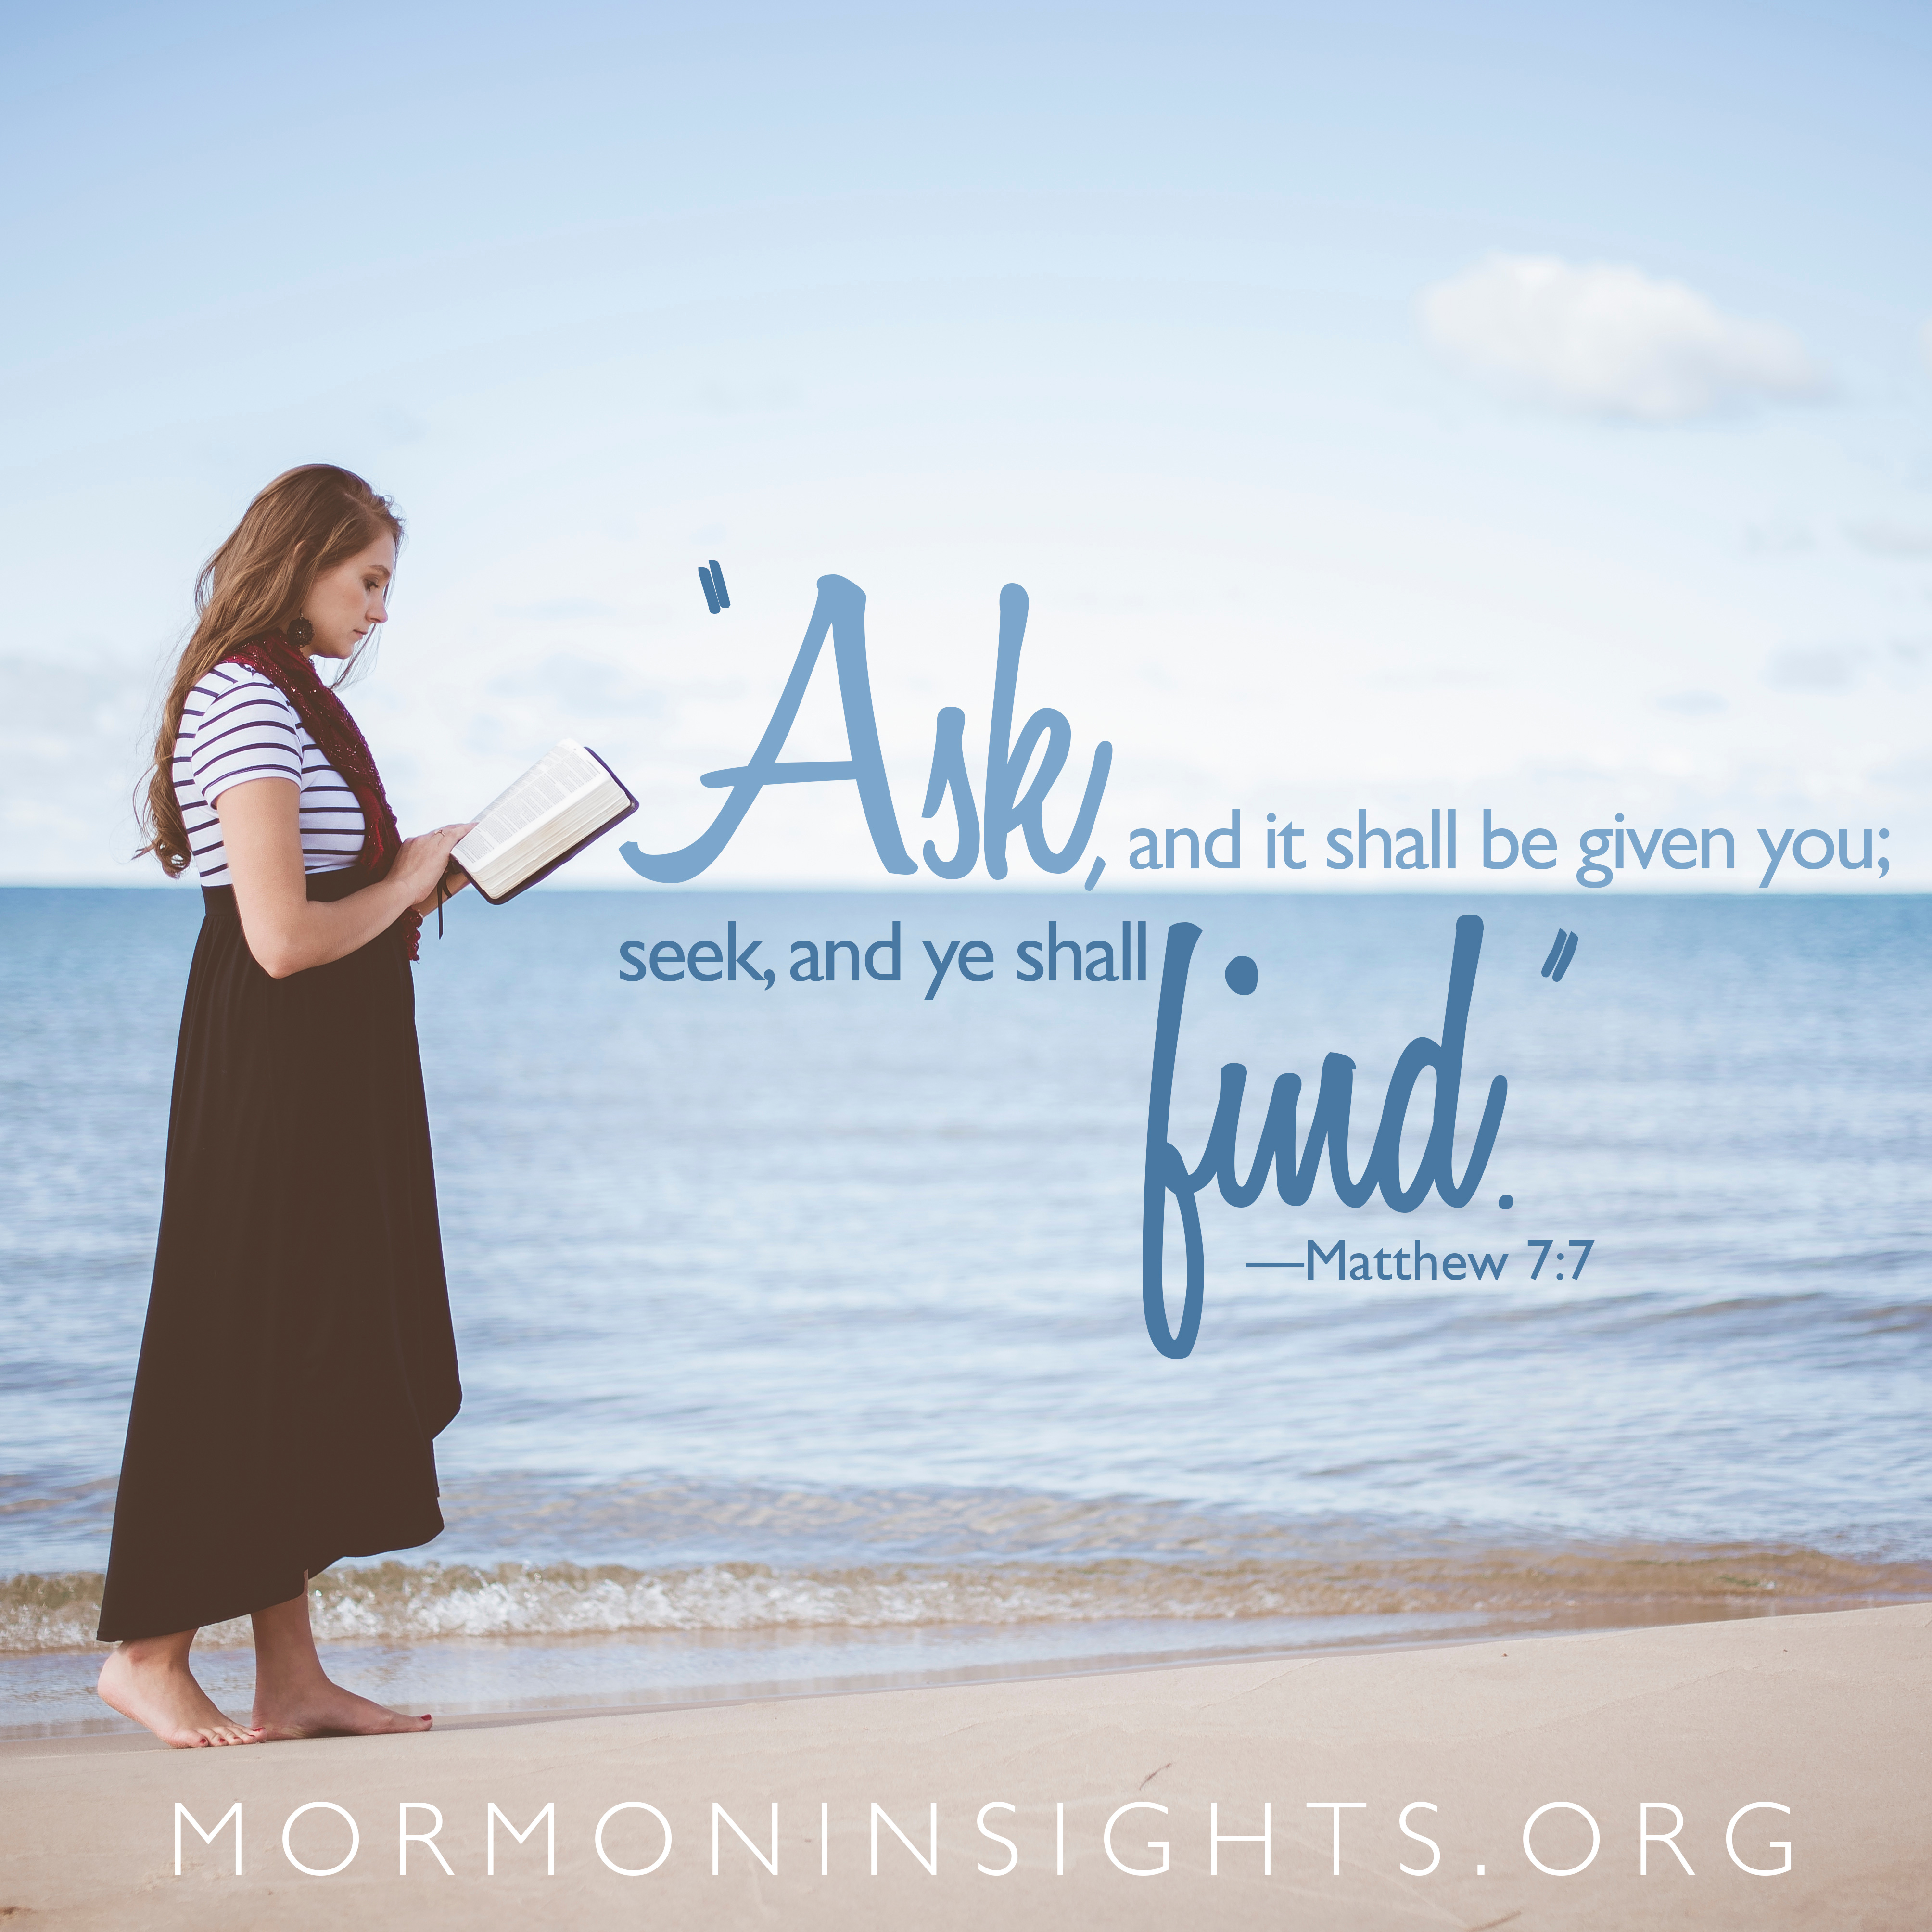 "Ask, and it shall be given you; seek, and ye shall ind." -Matthew 7:7